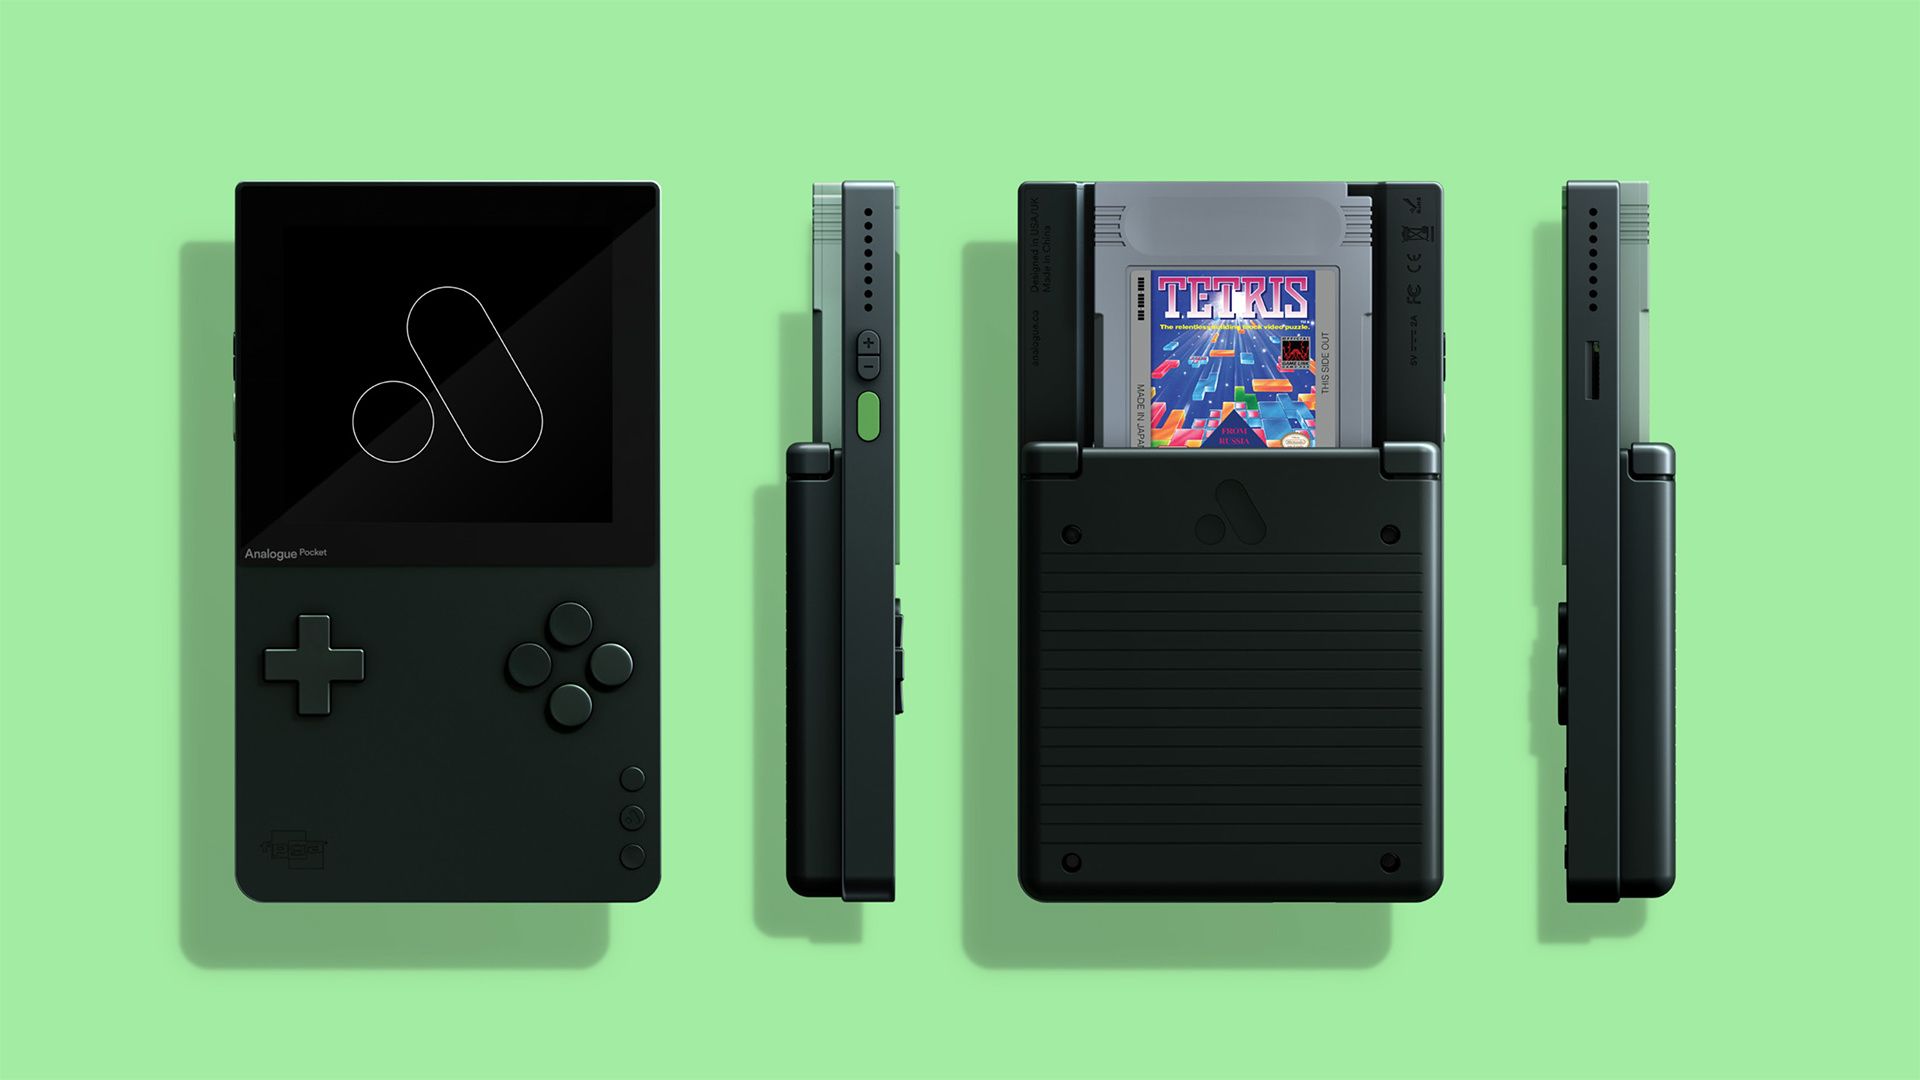 Analogue's $200 Pocket could be the ultimate retro gaming portable